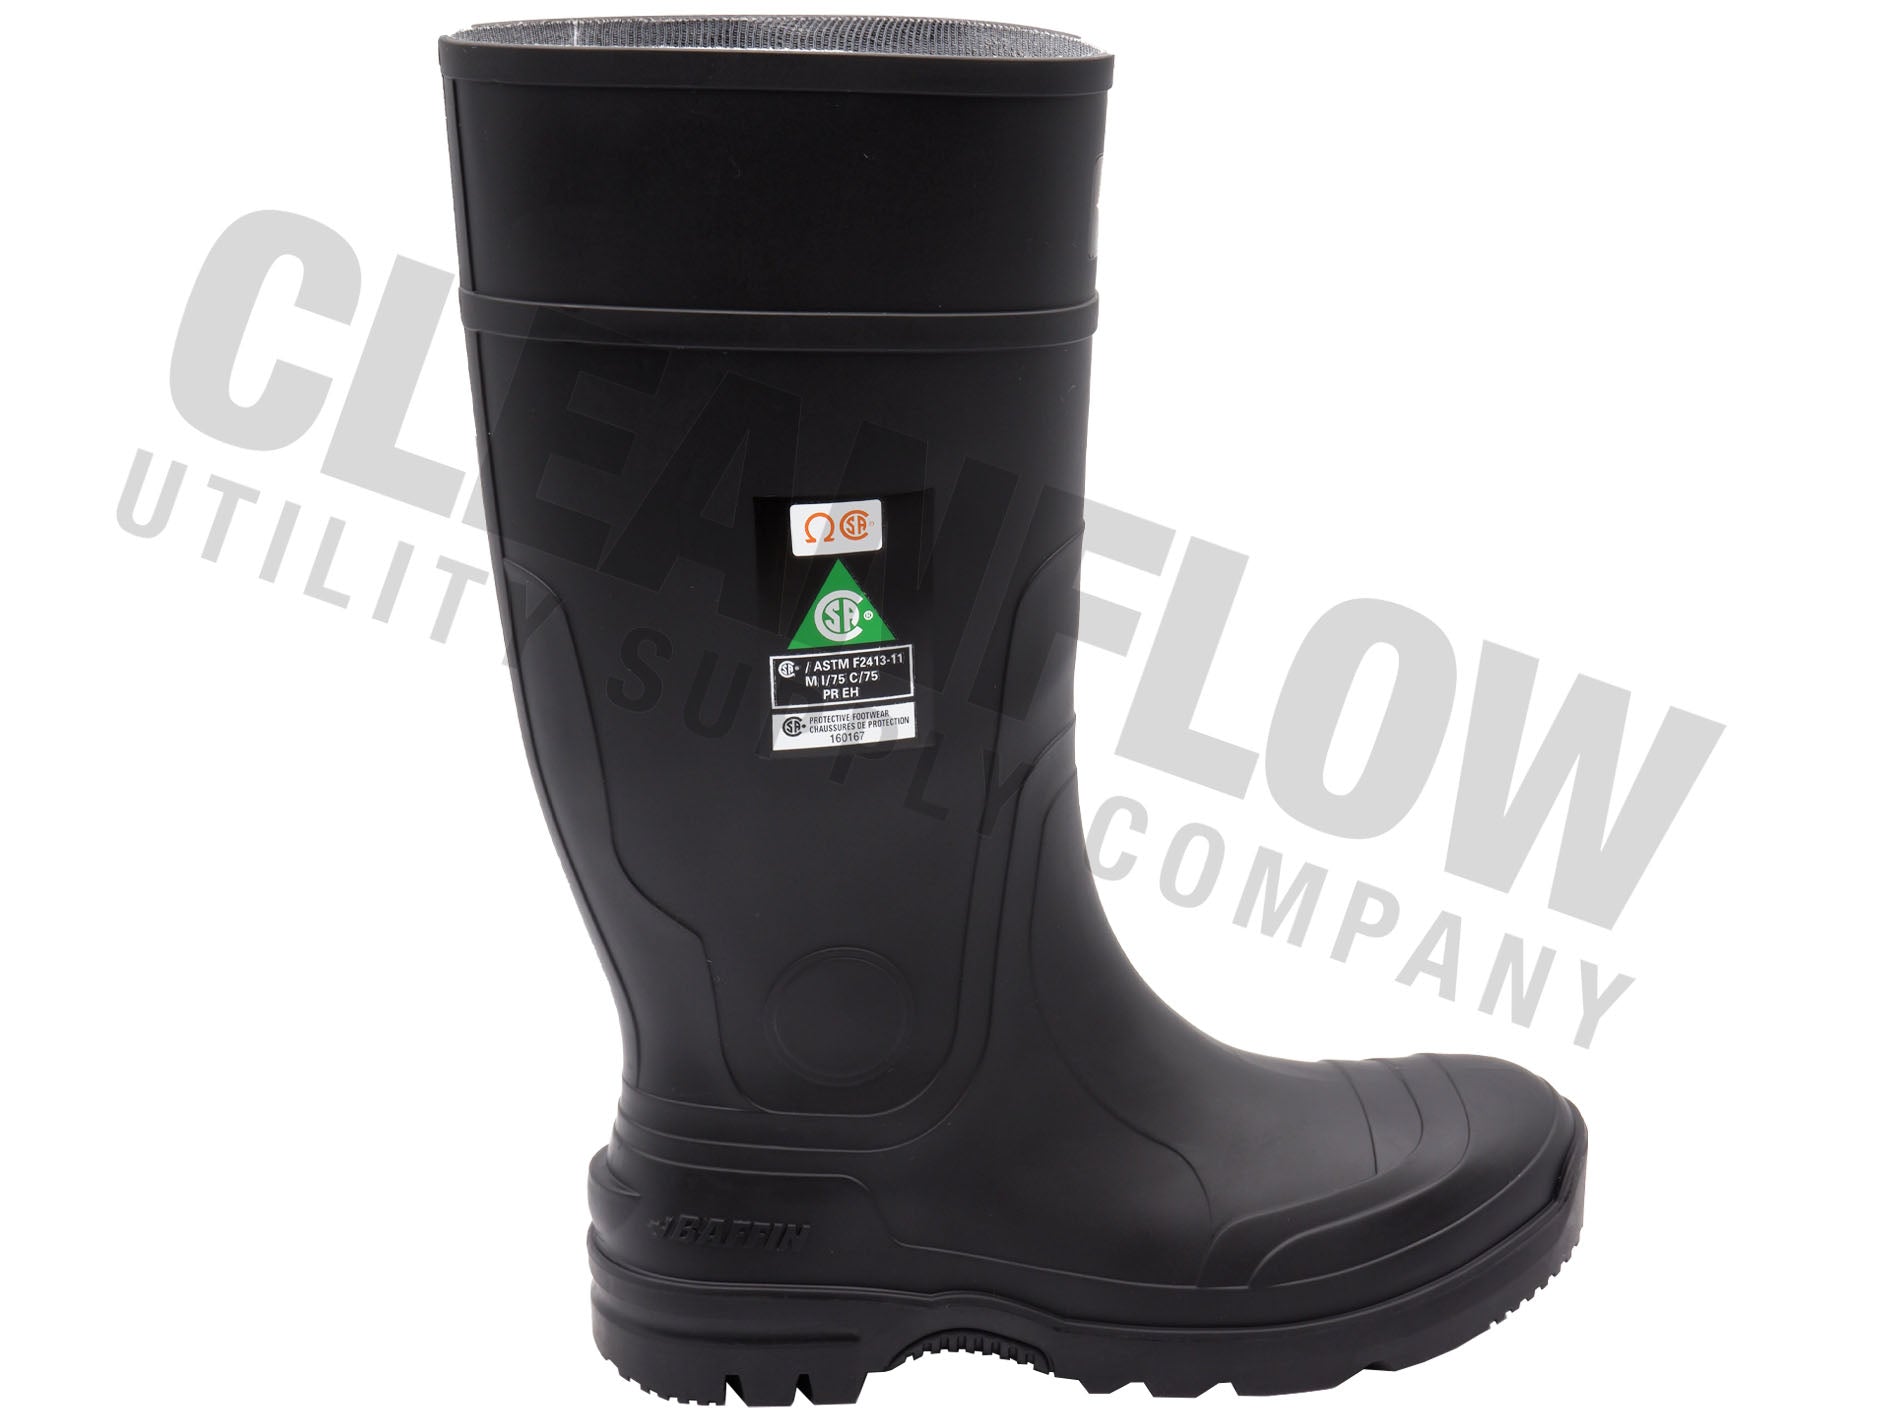 Baffin Men's Safety Boots Blackhawk Steel Toe Steel Plate with Lug Sole Rubber Sizes 7-14